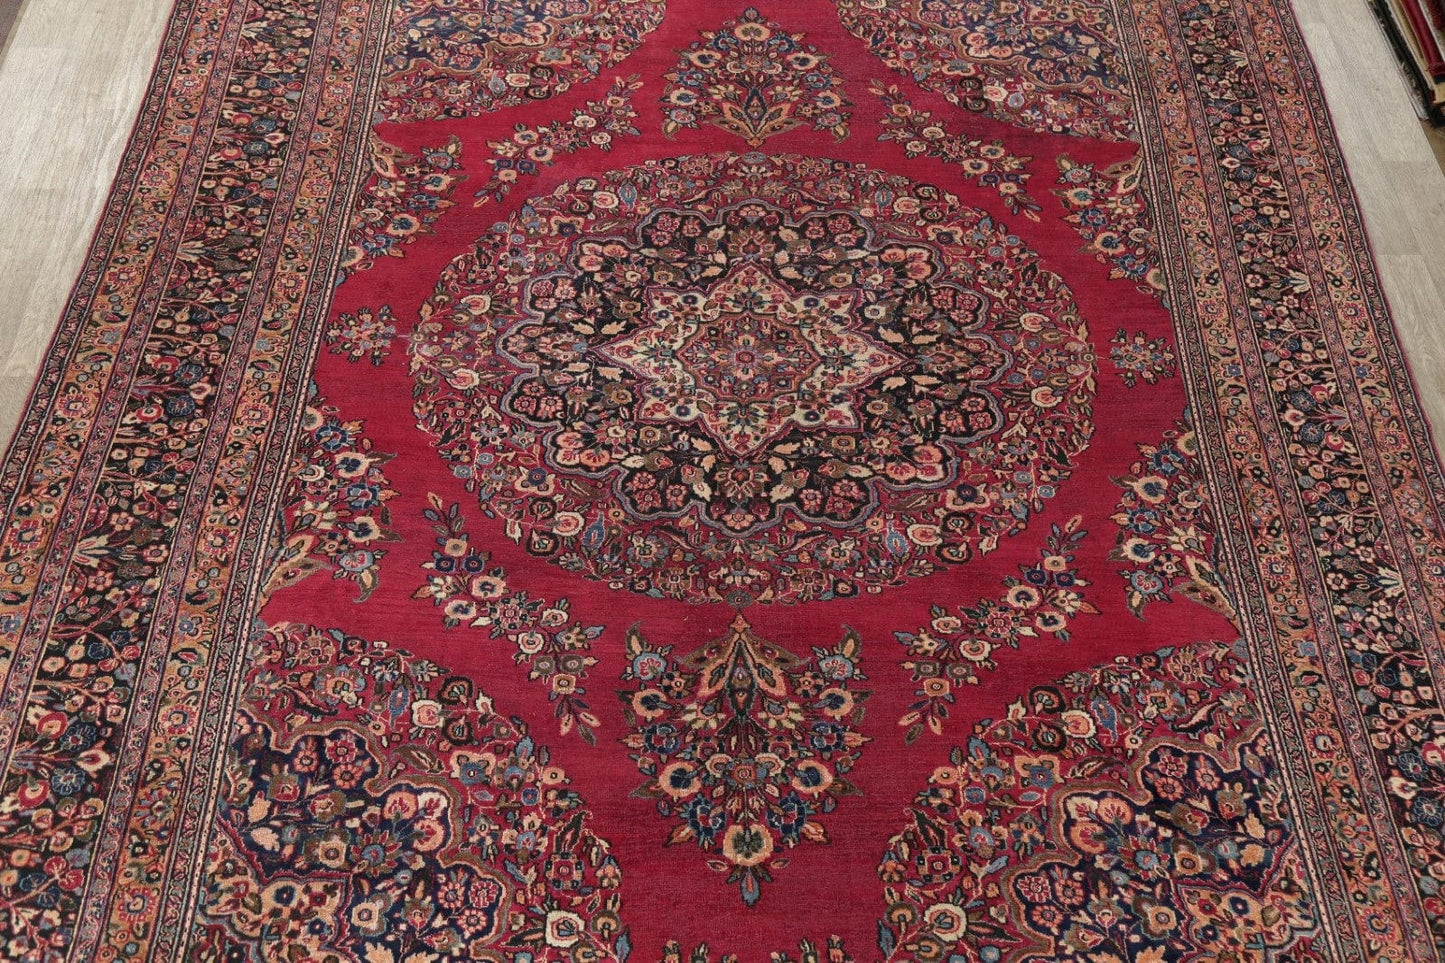 Antique Floral Red Dorokhsh Persian Rug Large 11x14